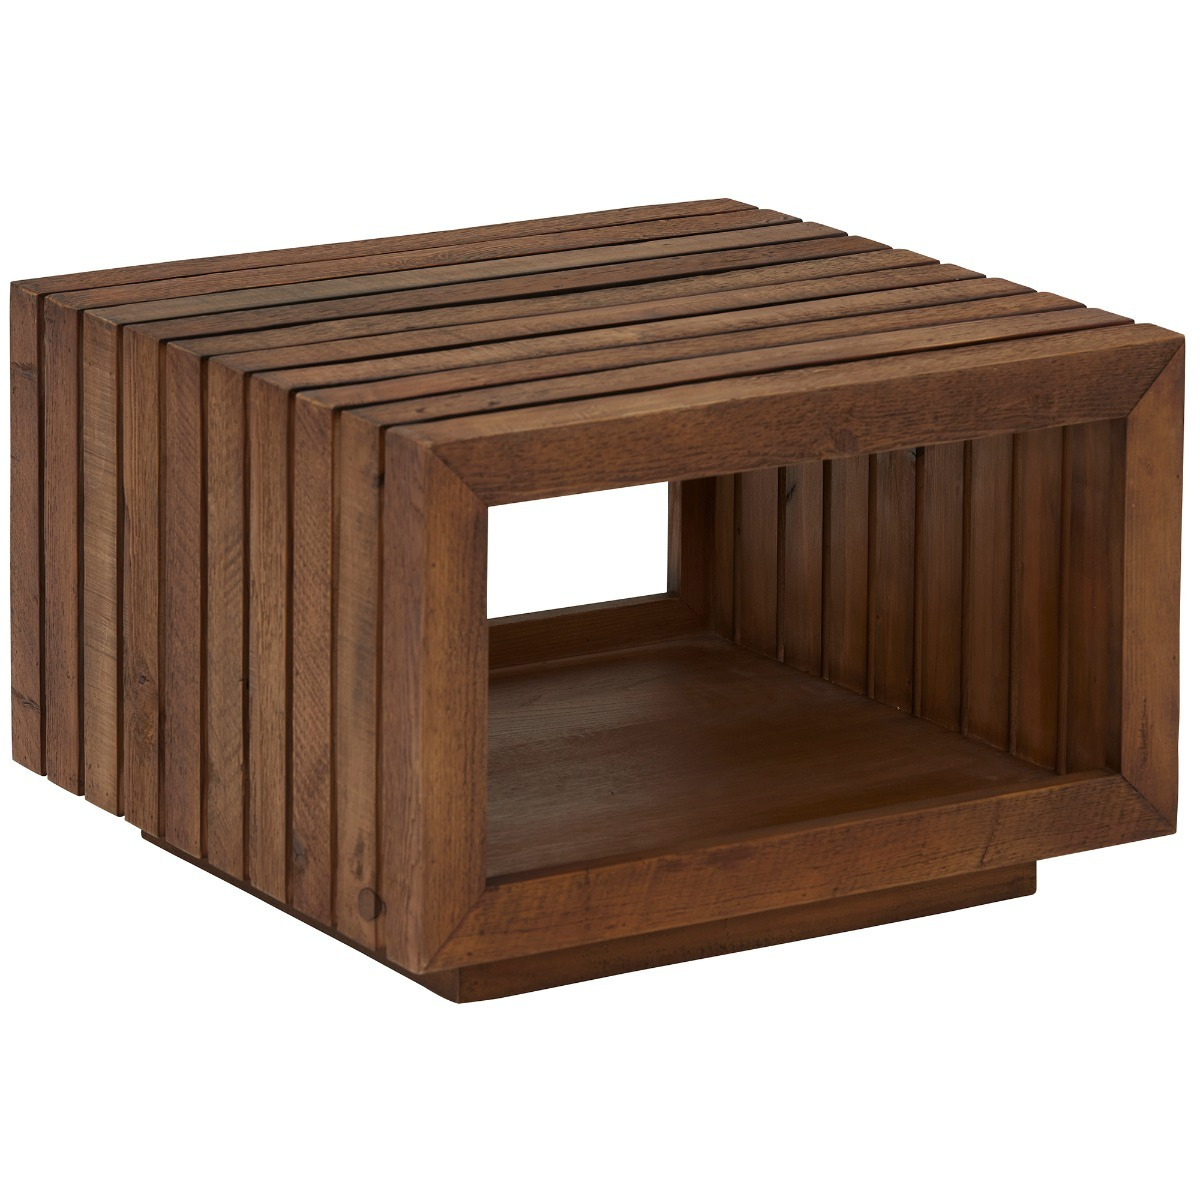 Bumi Coffee Table, Brown - Barker & Stonehouse - image 1